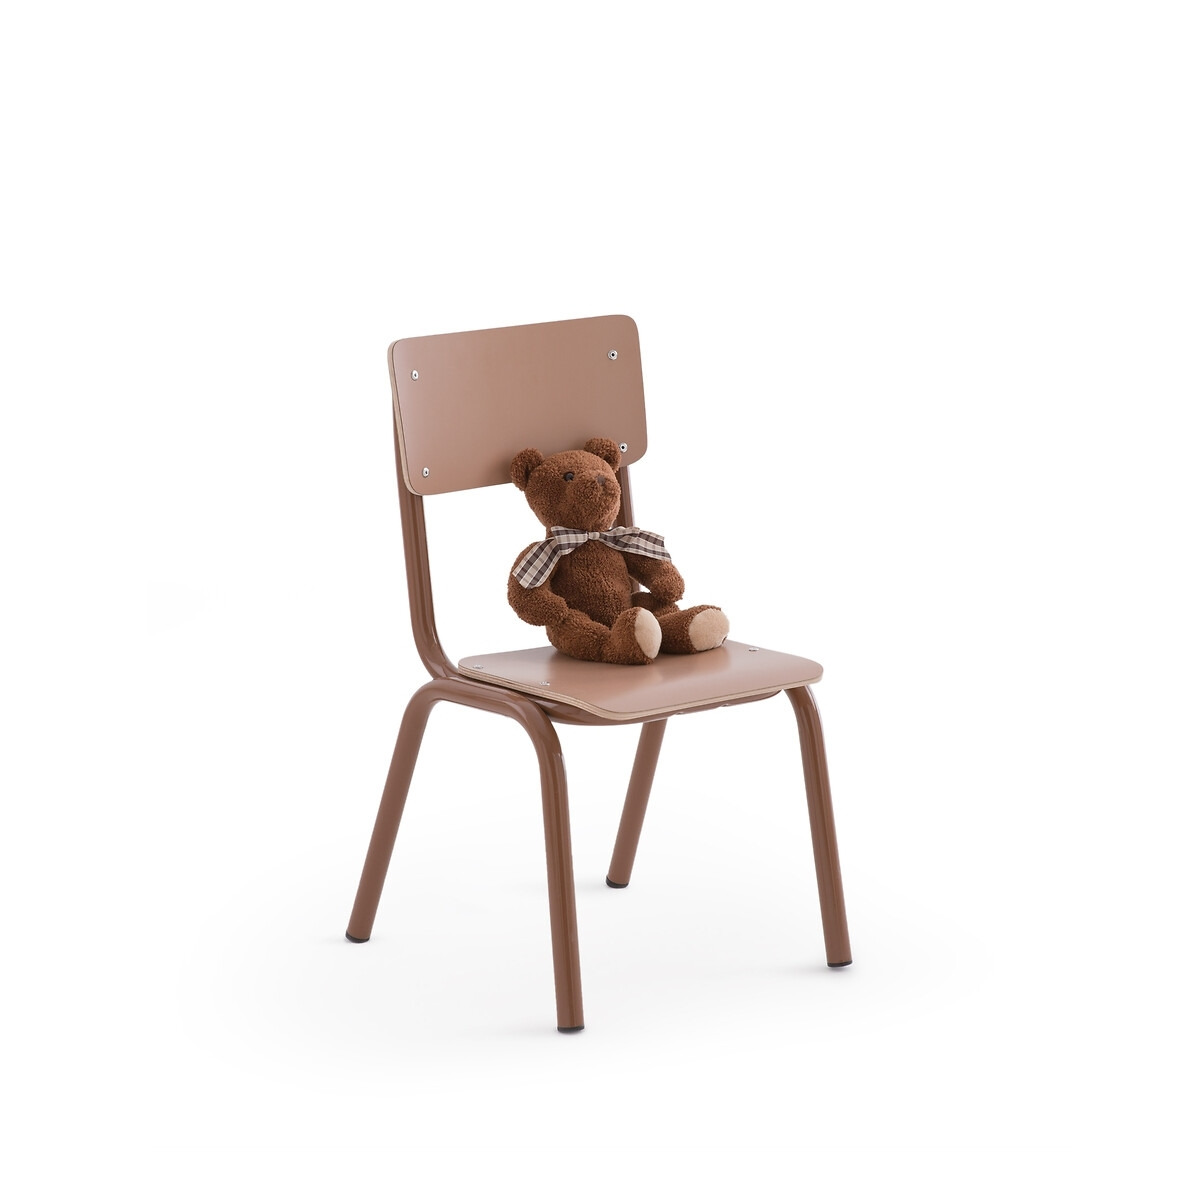 Susy Child's School Chair - image 1